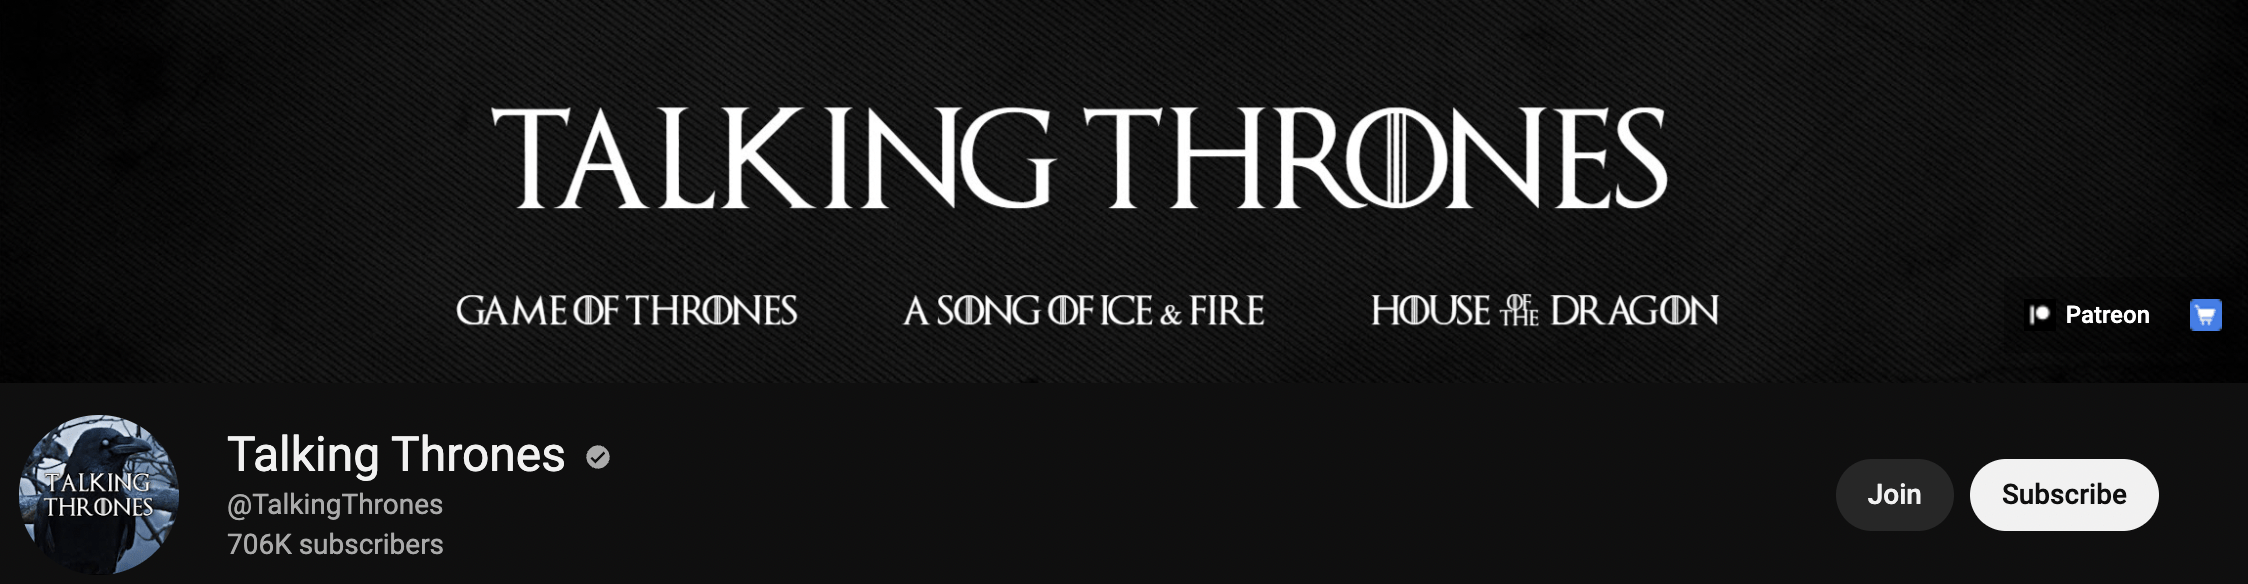 Talking Thrones Youtube Cover